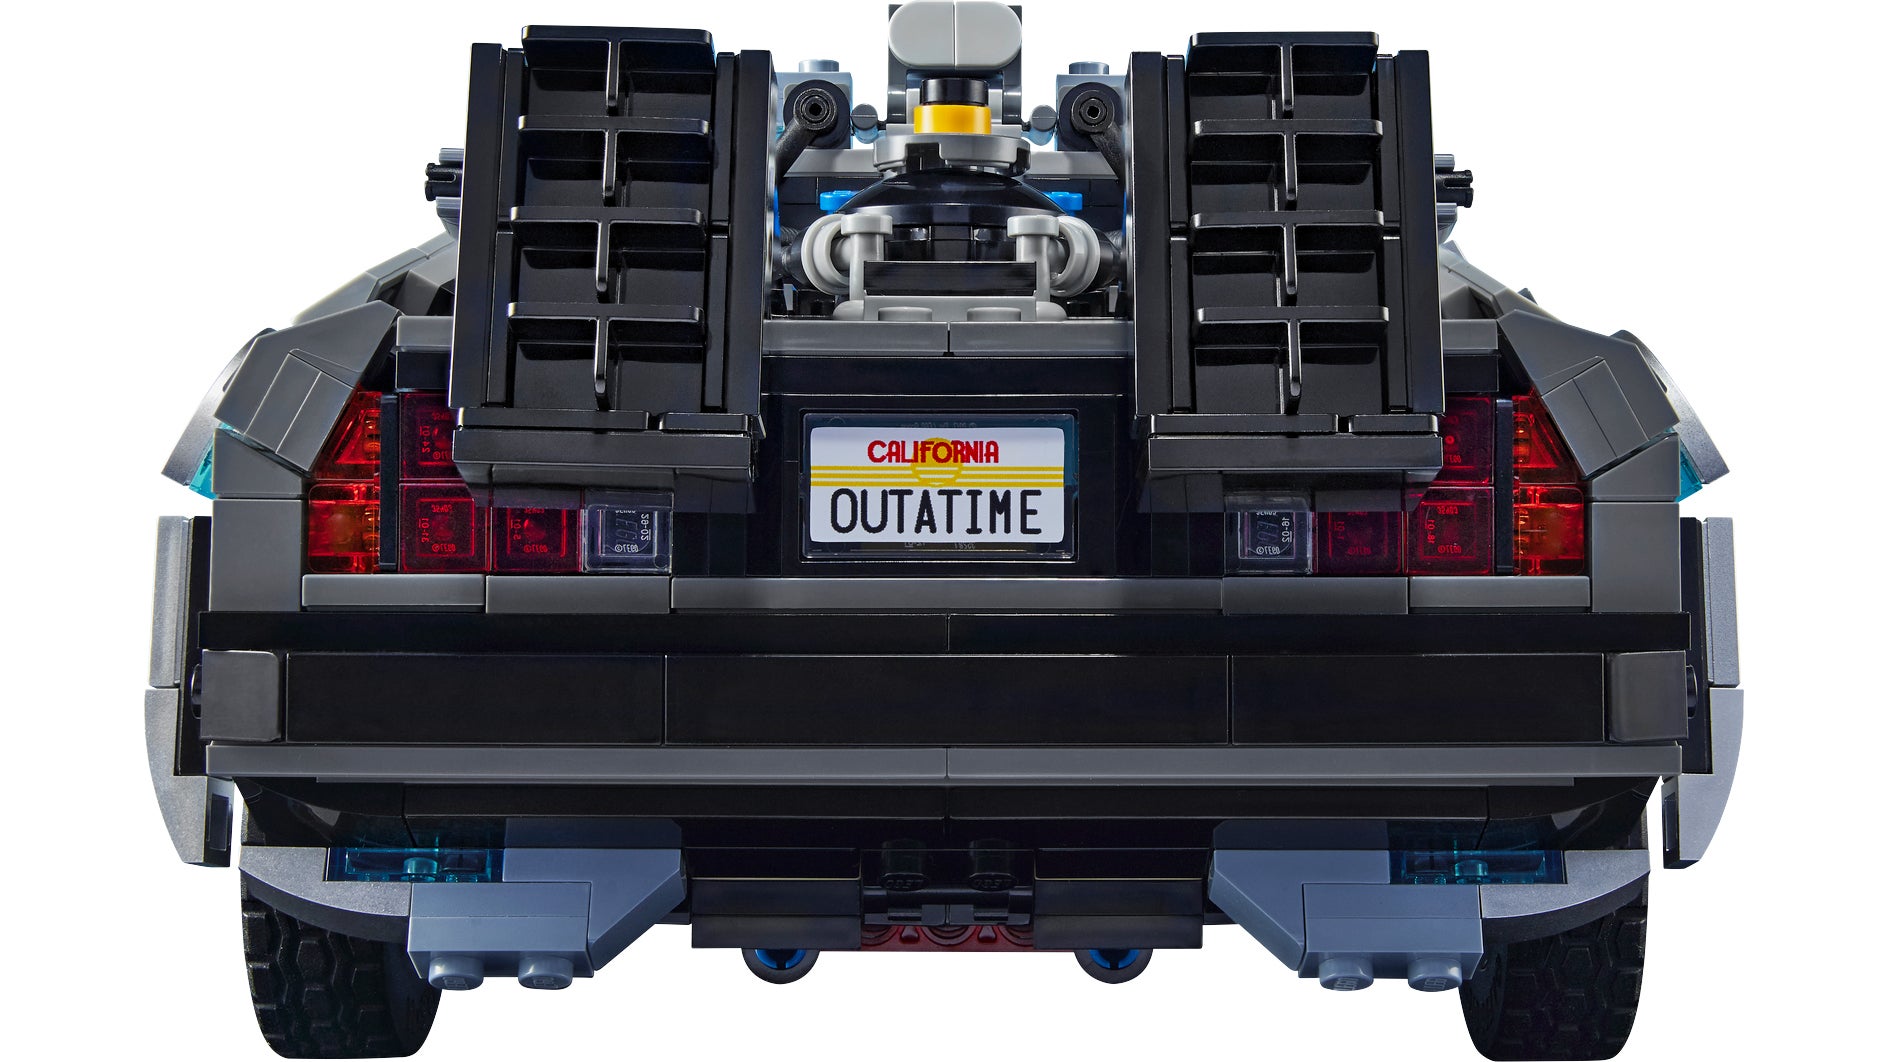 Lego’s New Back to the Future DeLorean Lets You Build Versions From All Three Movies